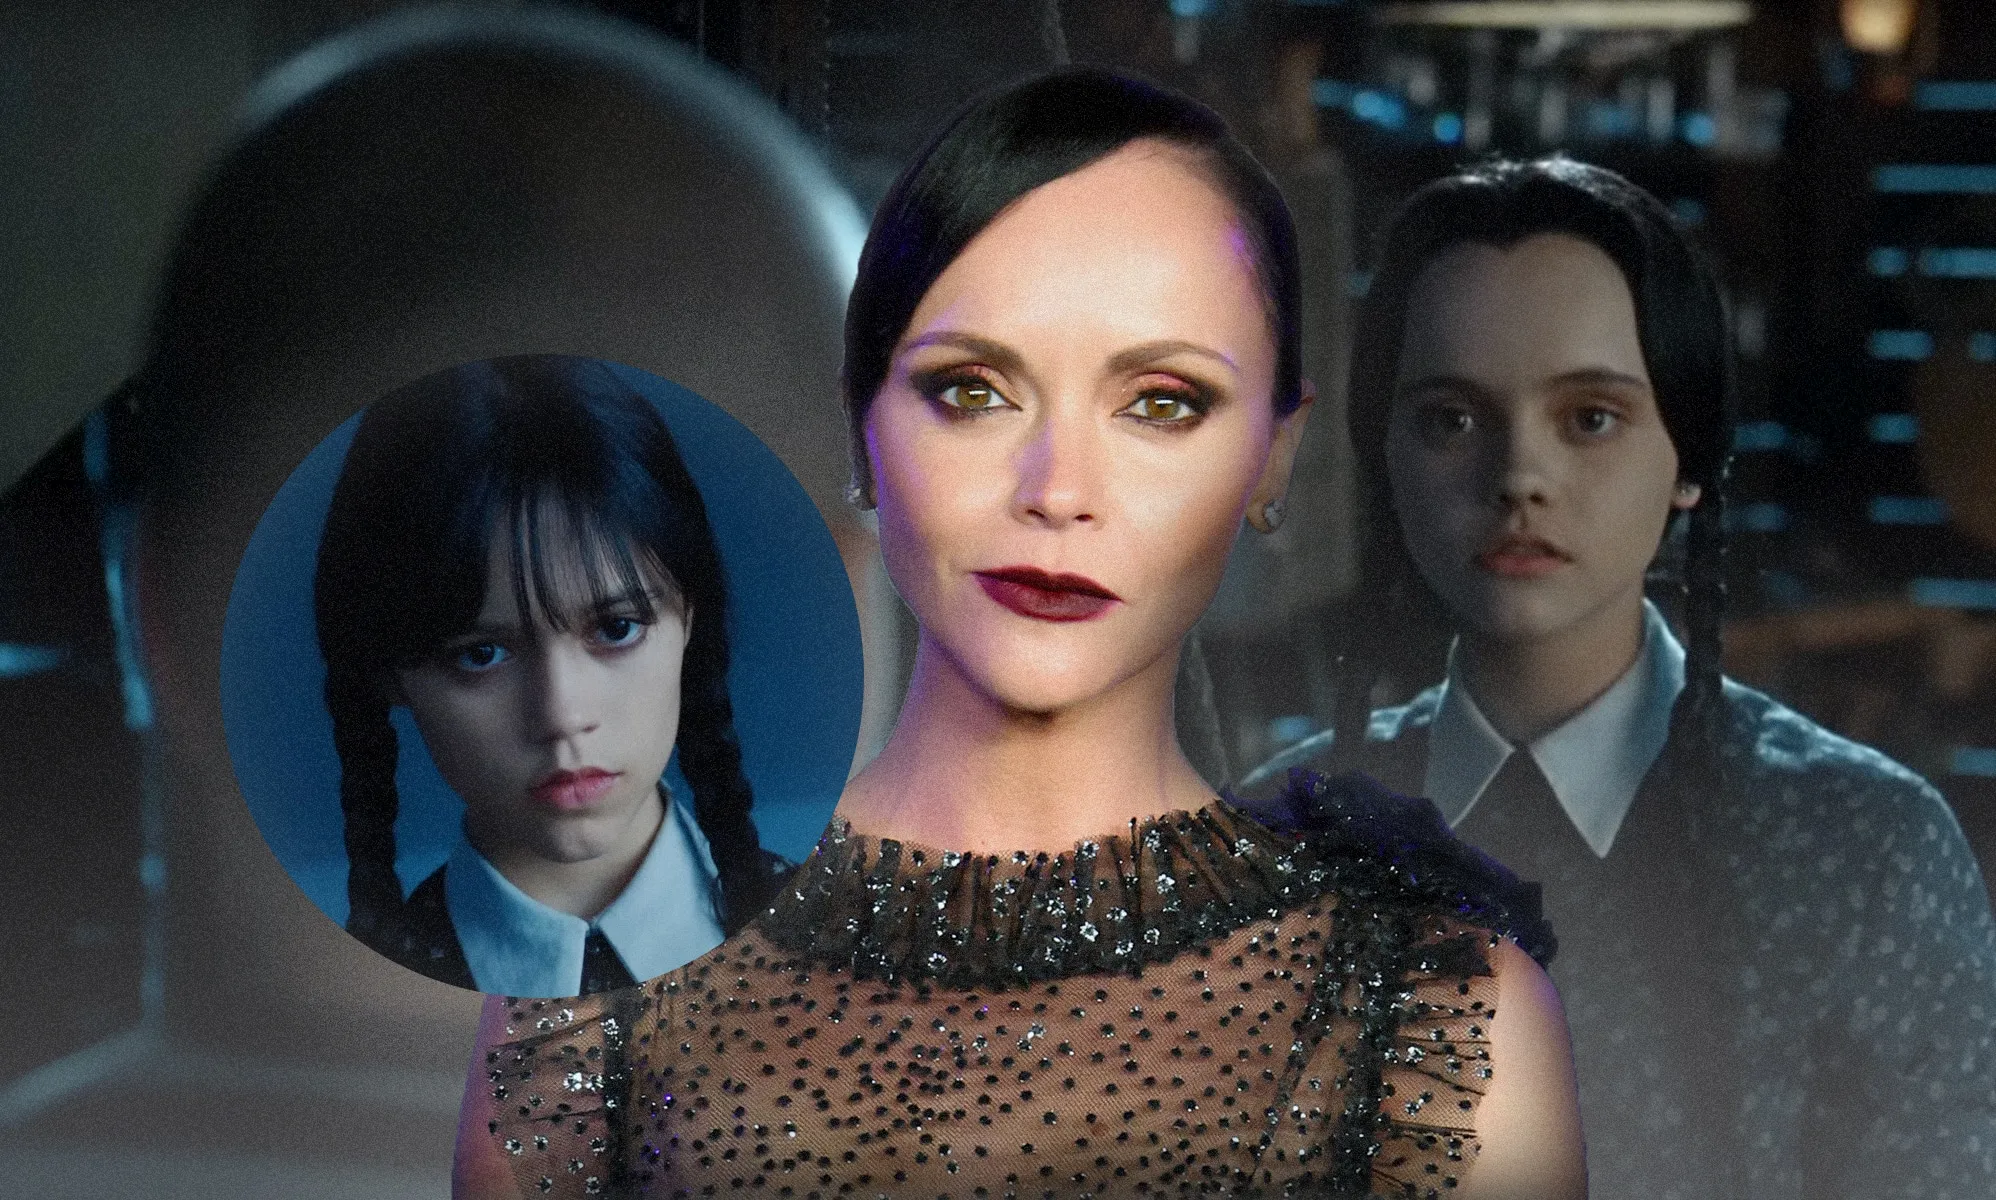 Christina Ricci cast in Netflix's Addams Family show Wednesday in